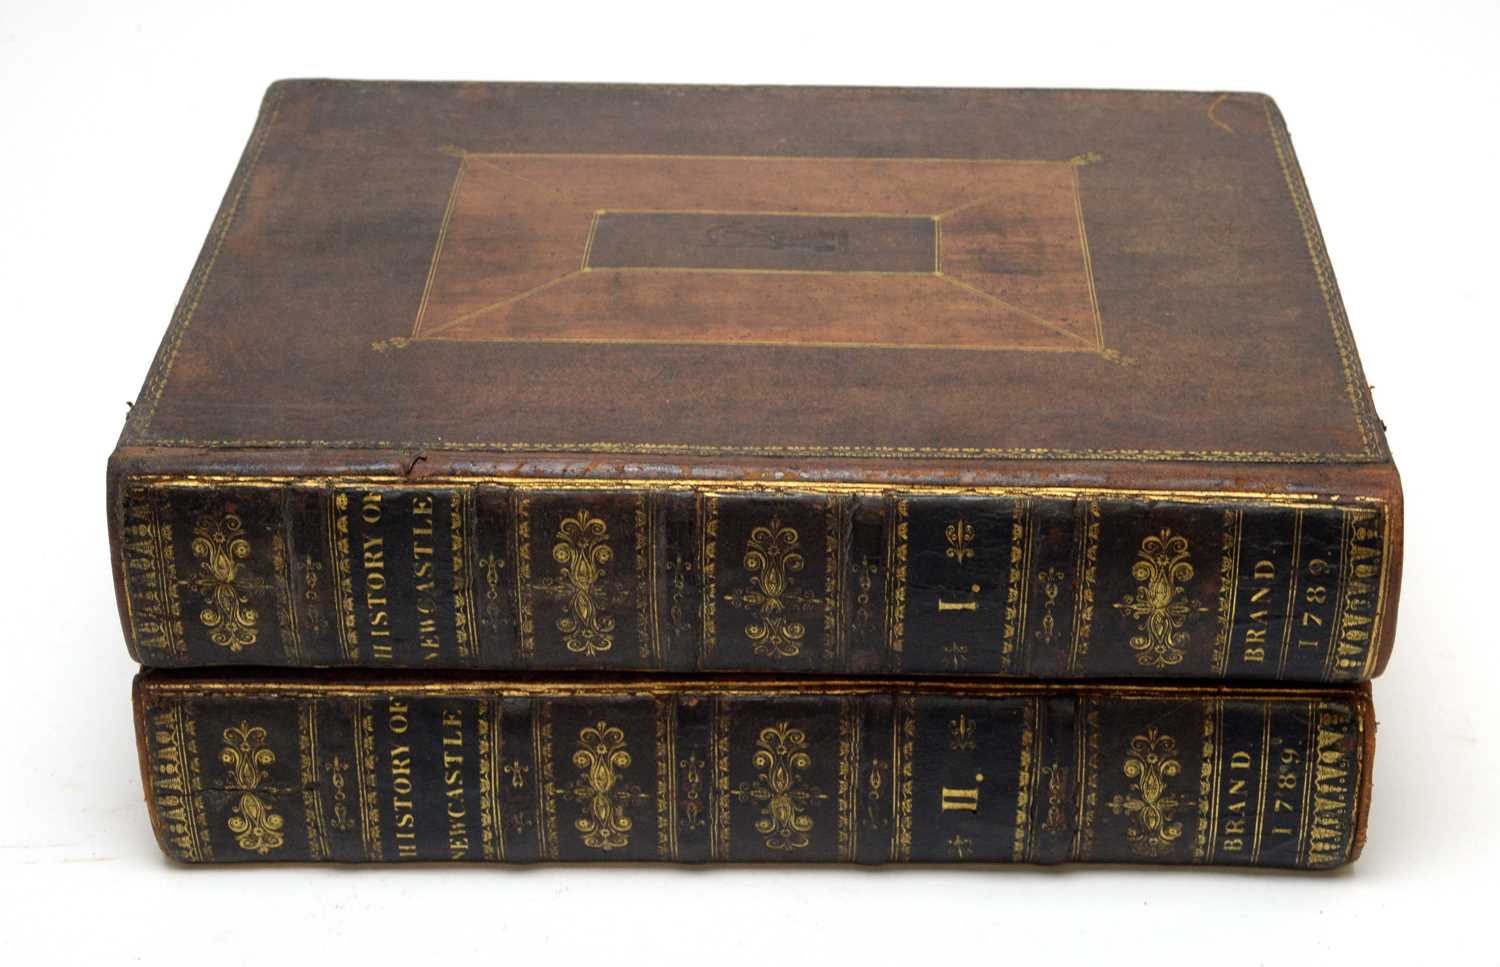 Lot 712 - The History and Antiquities of the Town and County of Newcastle upon Tyne